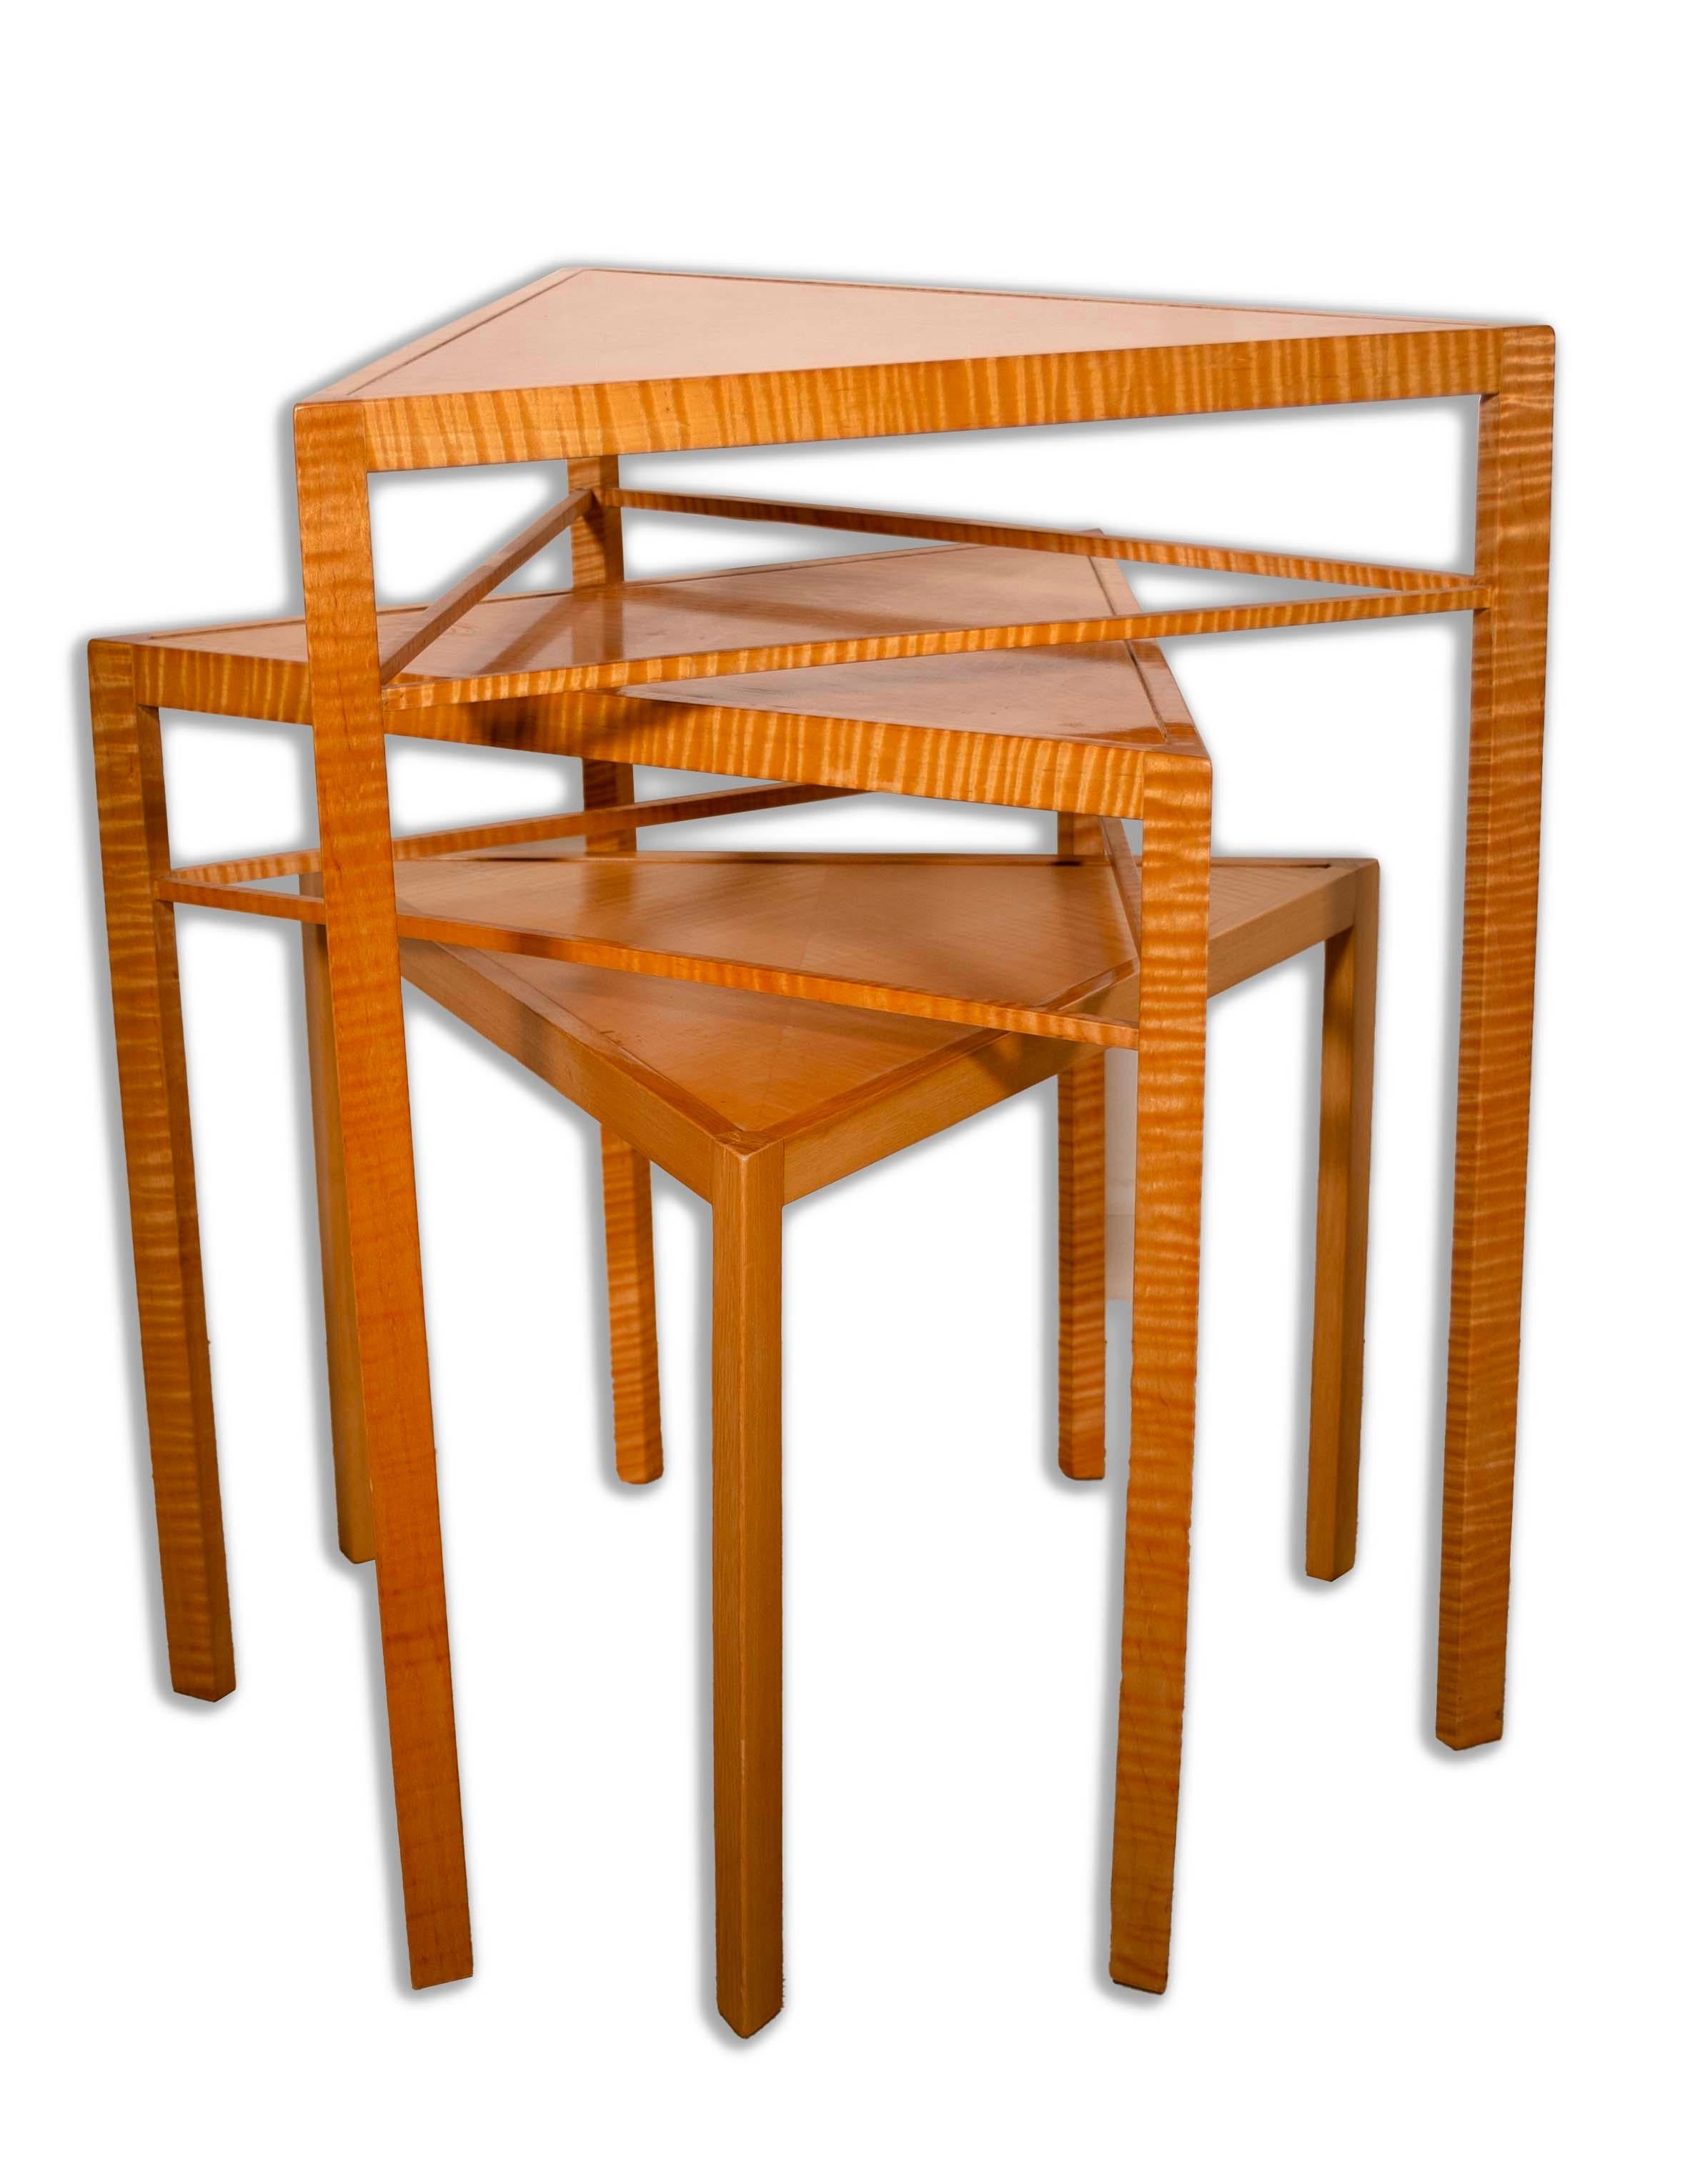 A handmade set of three postmodern nesting tables from the studio of furniture designer Ralph Rye – referred to as the “Kite Tables” design. Signed on underside and dated 2005. Triangular geometric forms made in curly maple wood. The top two-tier